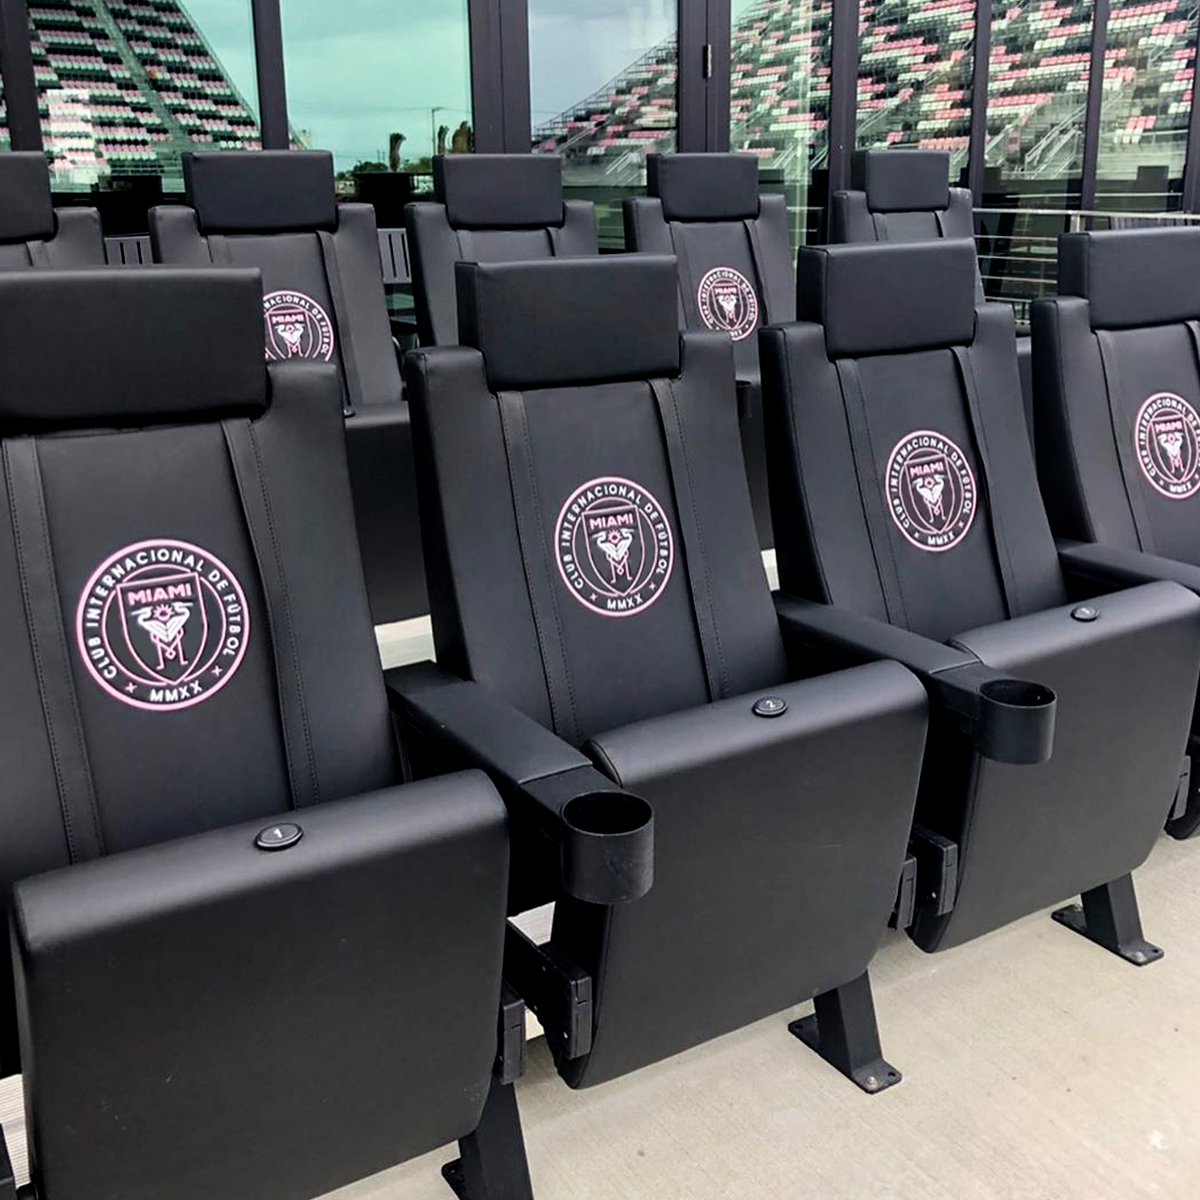 SuiteMax 3.5 VIP Seats with Pittsburgh Panthers Secondary Logo